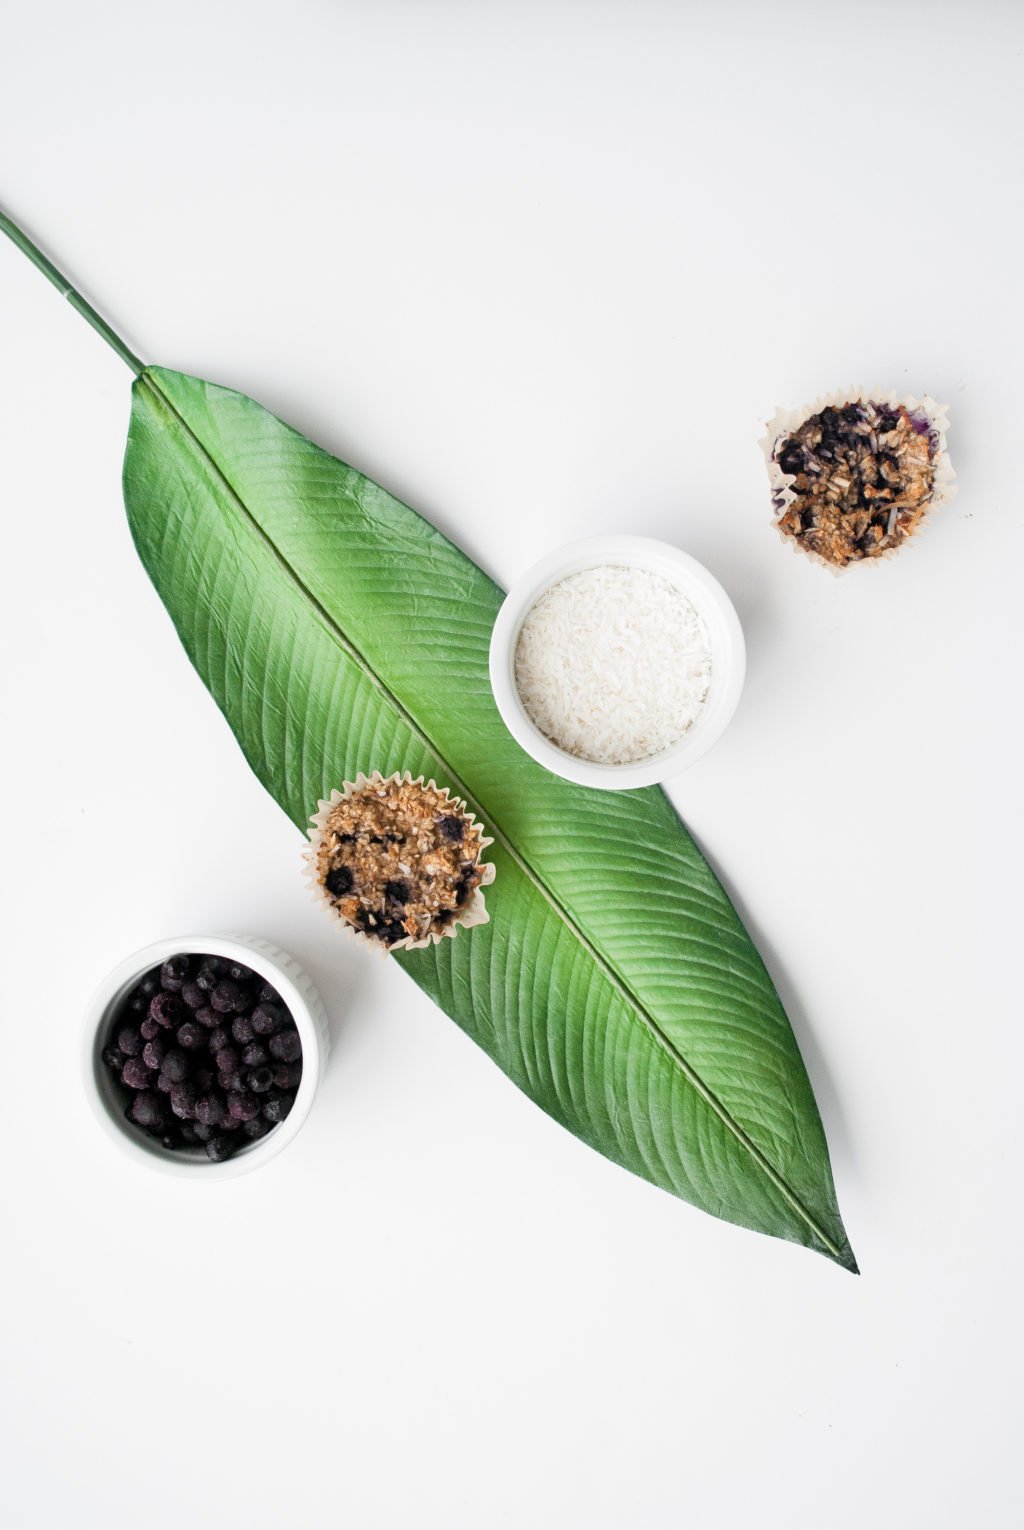 Bird's-eye view of two baked banana oatmeal cups between a bowl of blueberries and a bowl of shredded coconut on top of a tropical leaf and white backdrop.